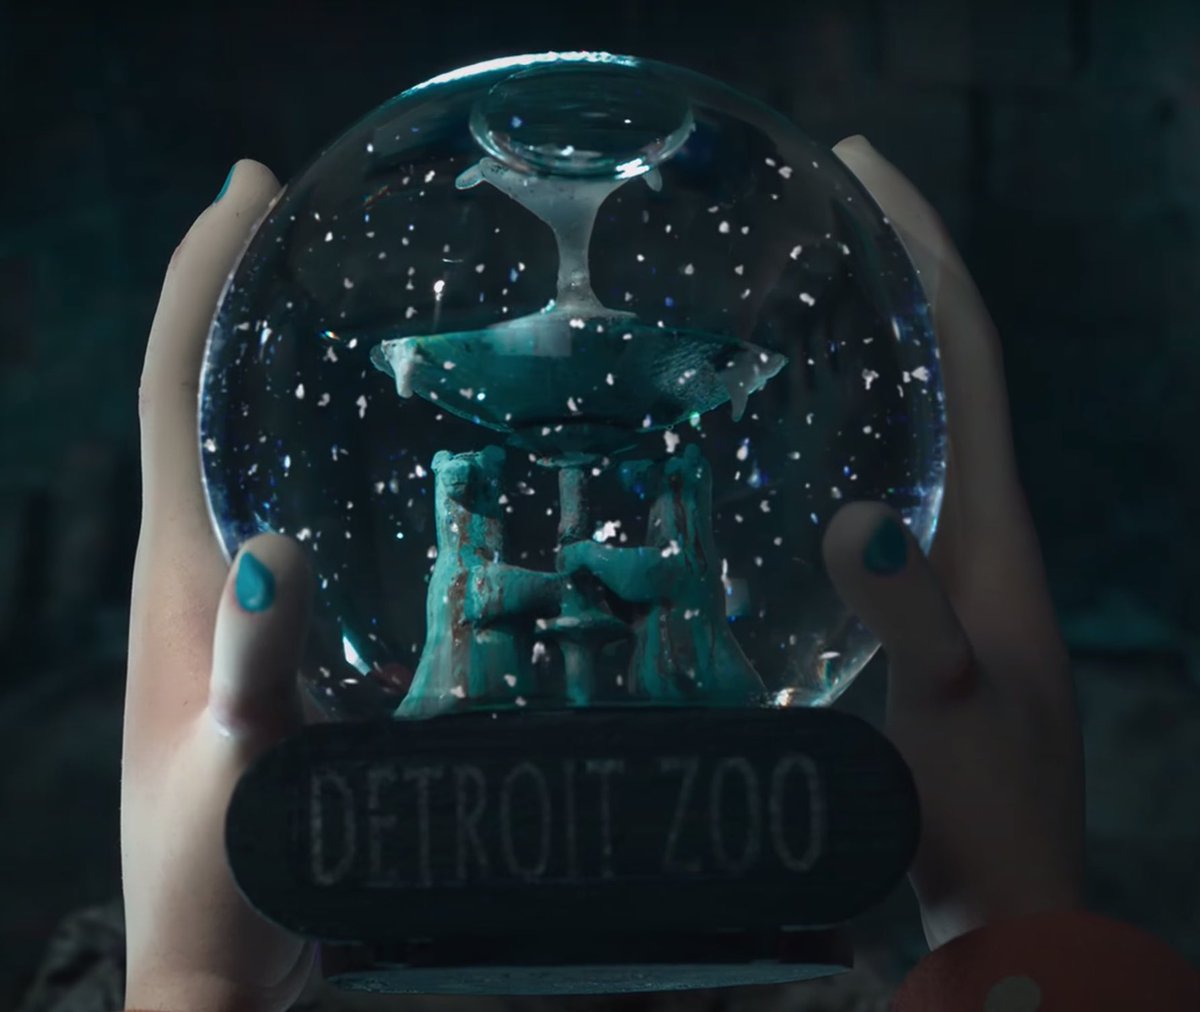 (36) In the Detroit Zoo snow globe, it features the real life fountain that features two bronze bears. Once Coraline breaks the globe to free her parents, these two bears are missing from the globe entirely.